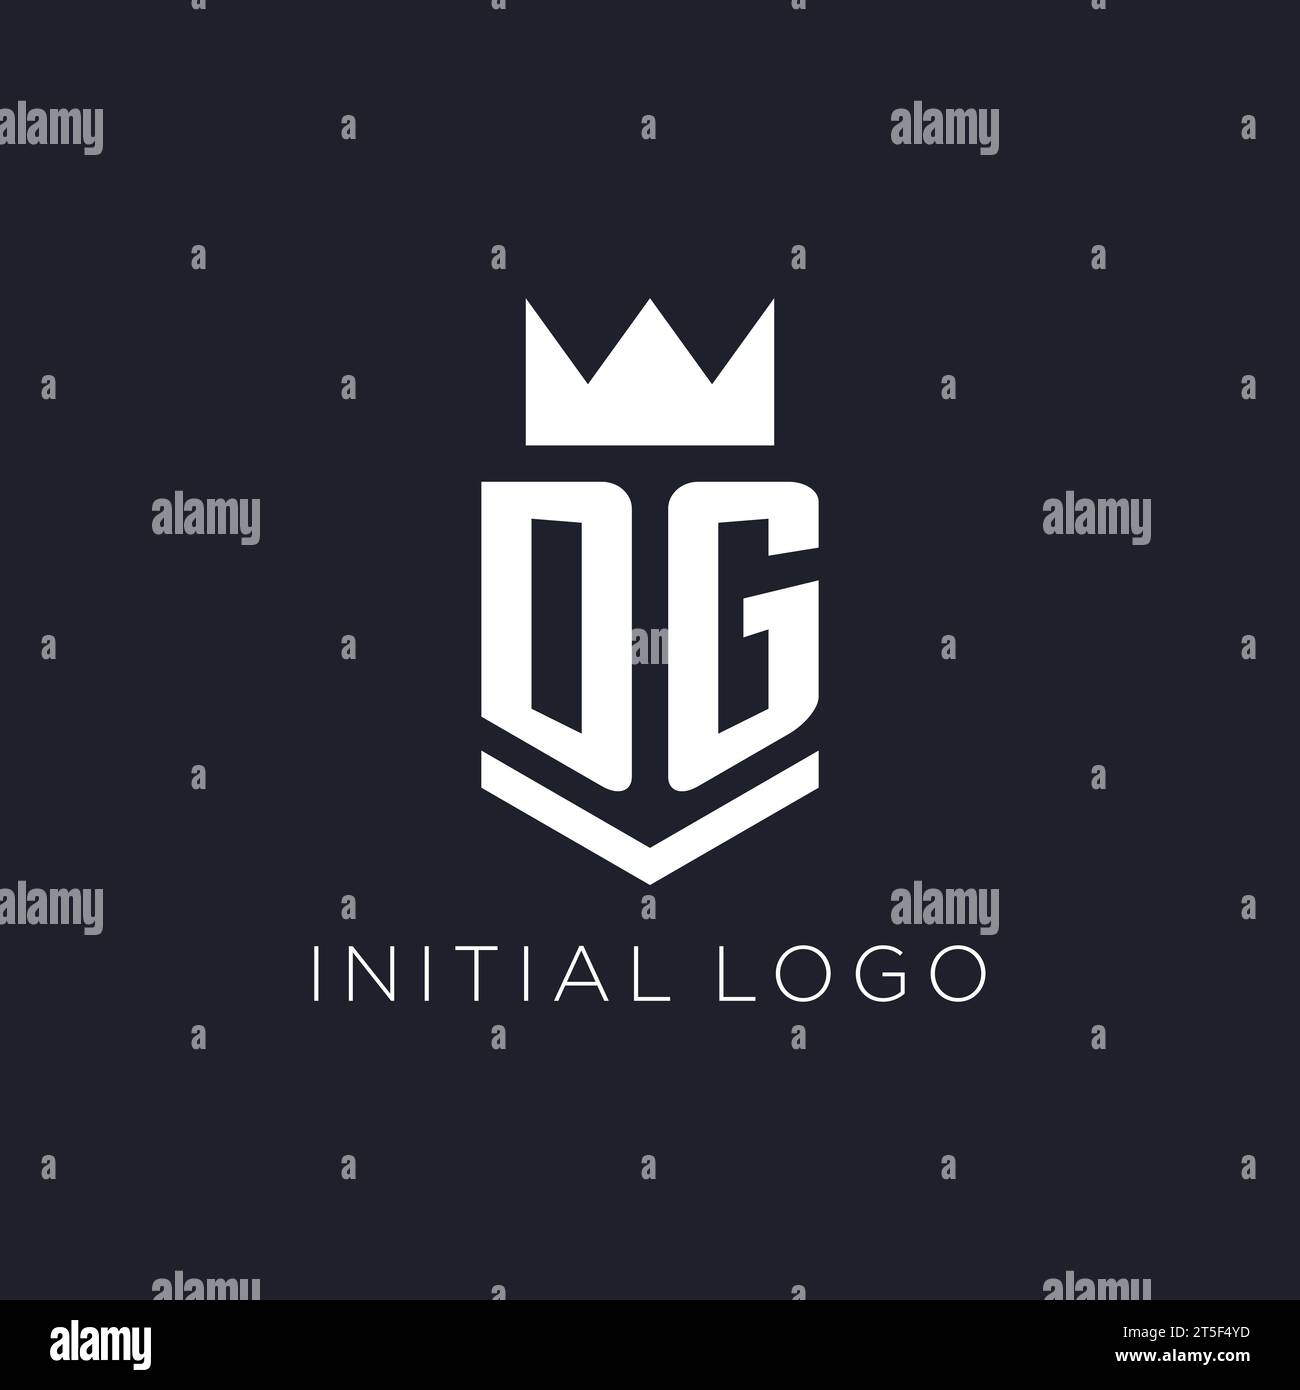 DG logo with shield and crown, initial monogram logo design ideas Stock Vector